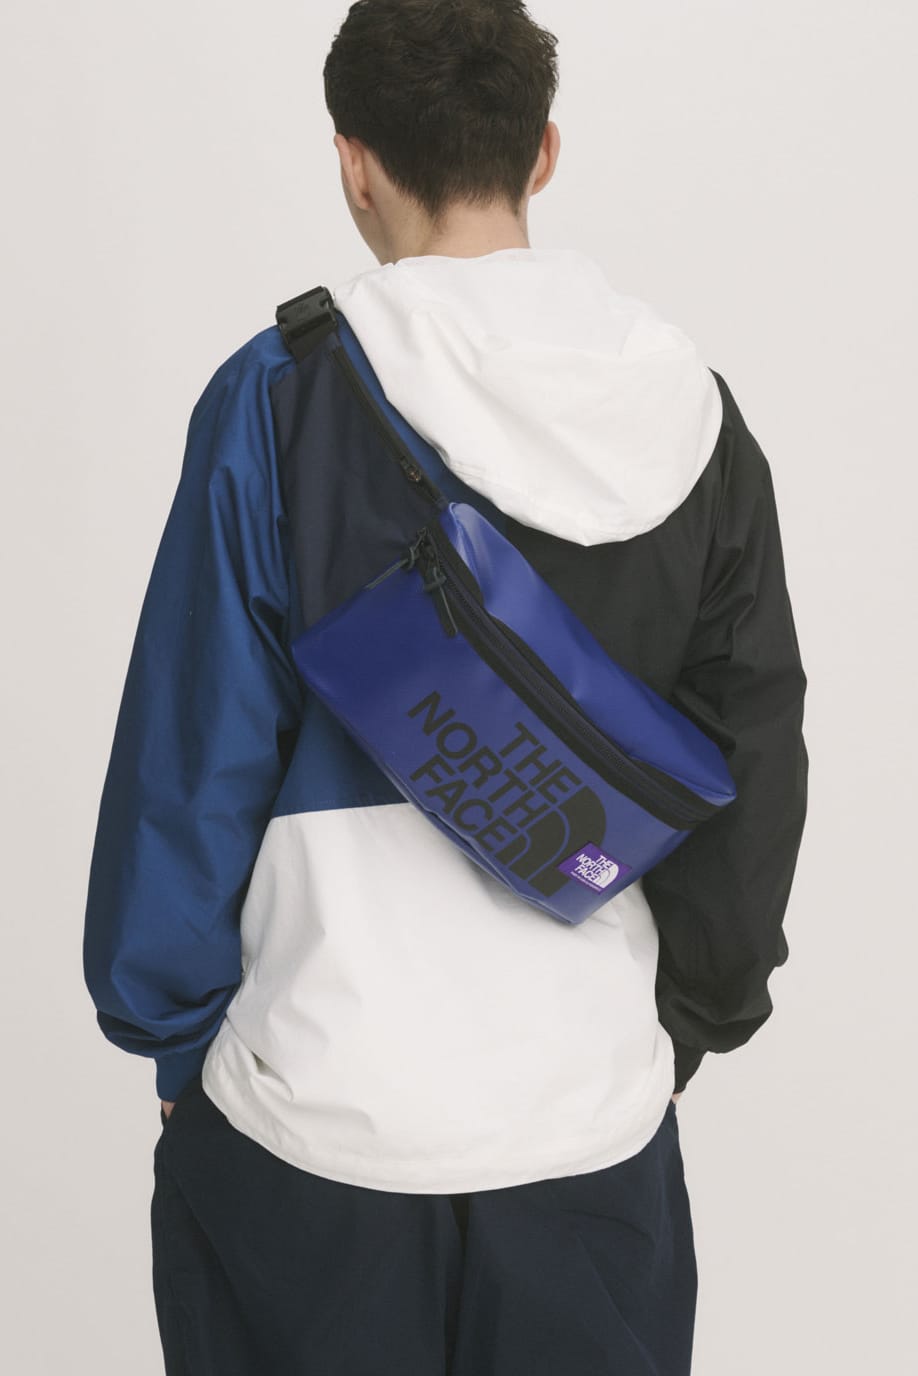 north face chest rig